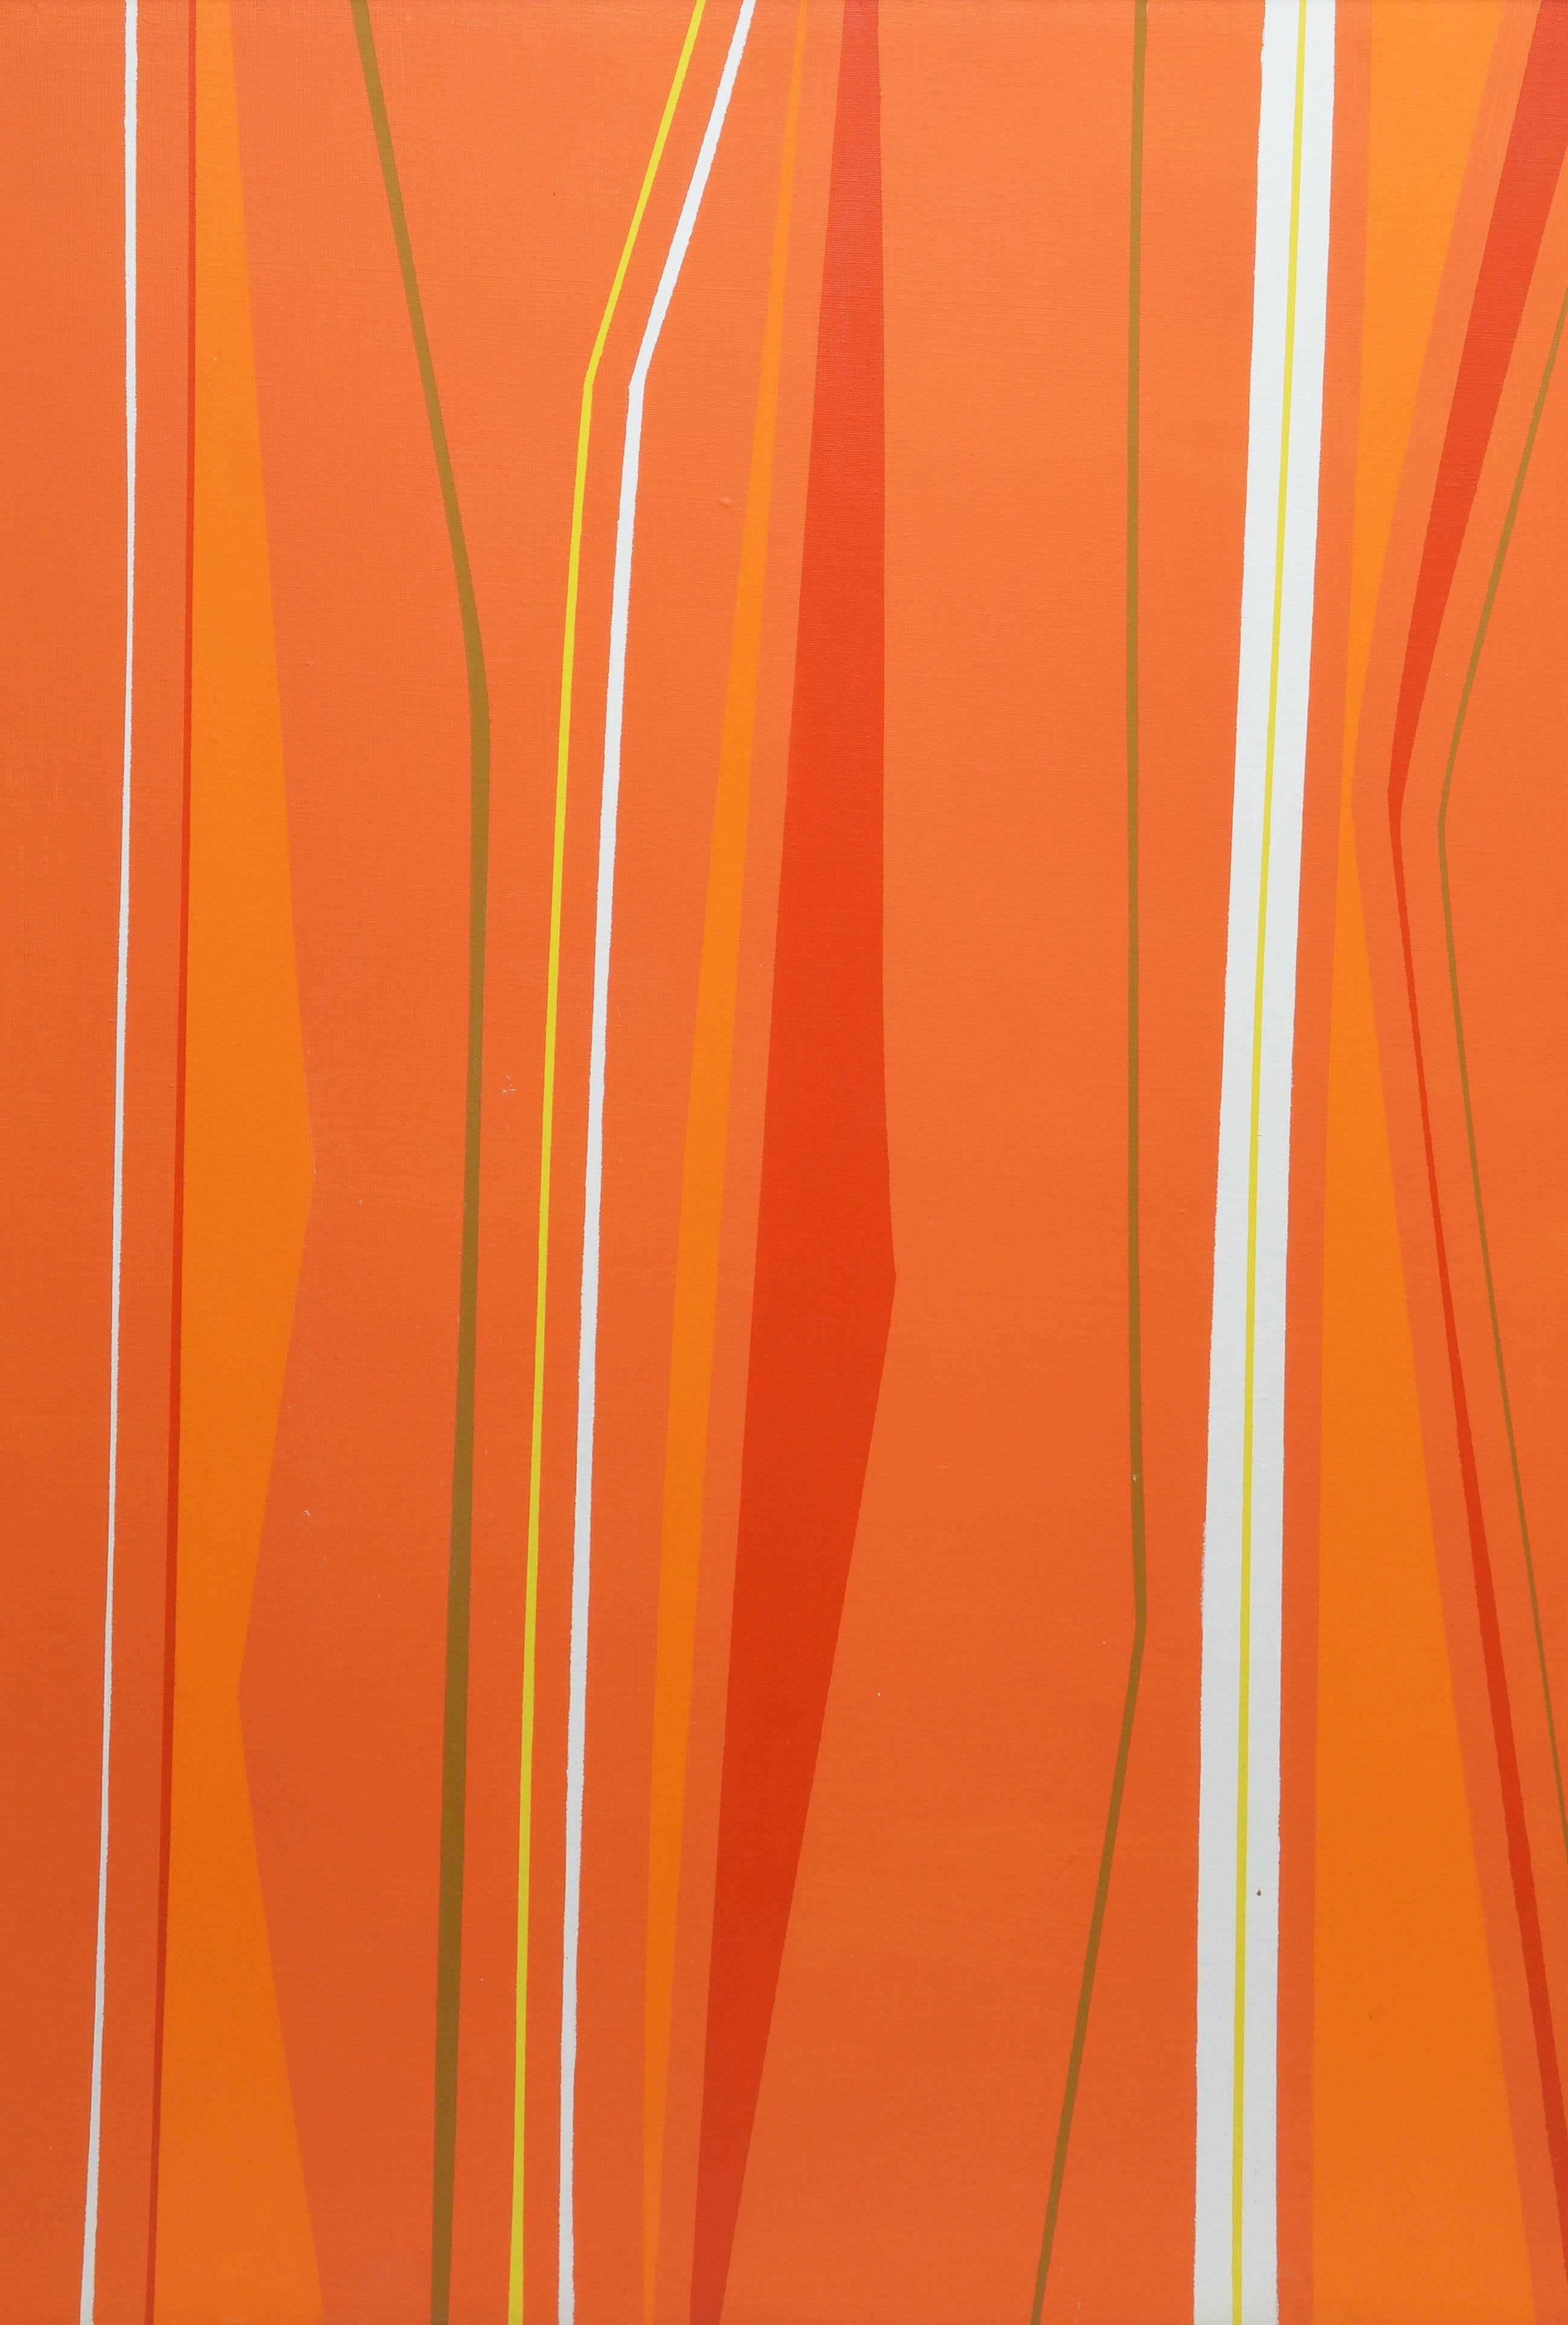 Hard Edge Geometric Abstraction - Orange Abstract Painting by Unknown